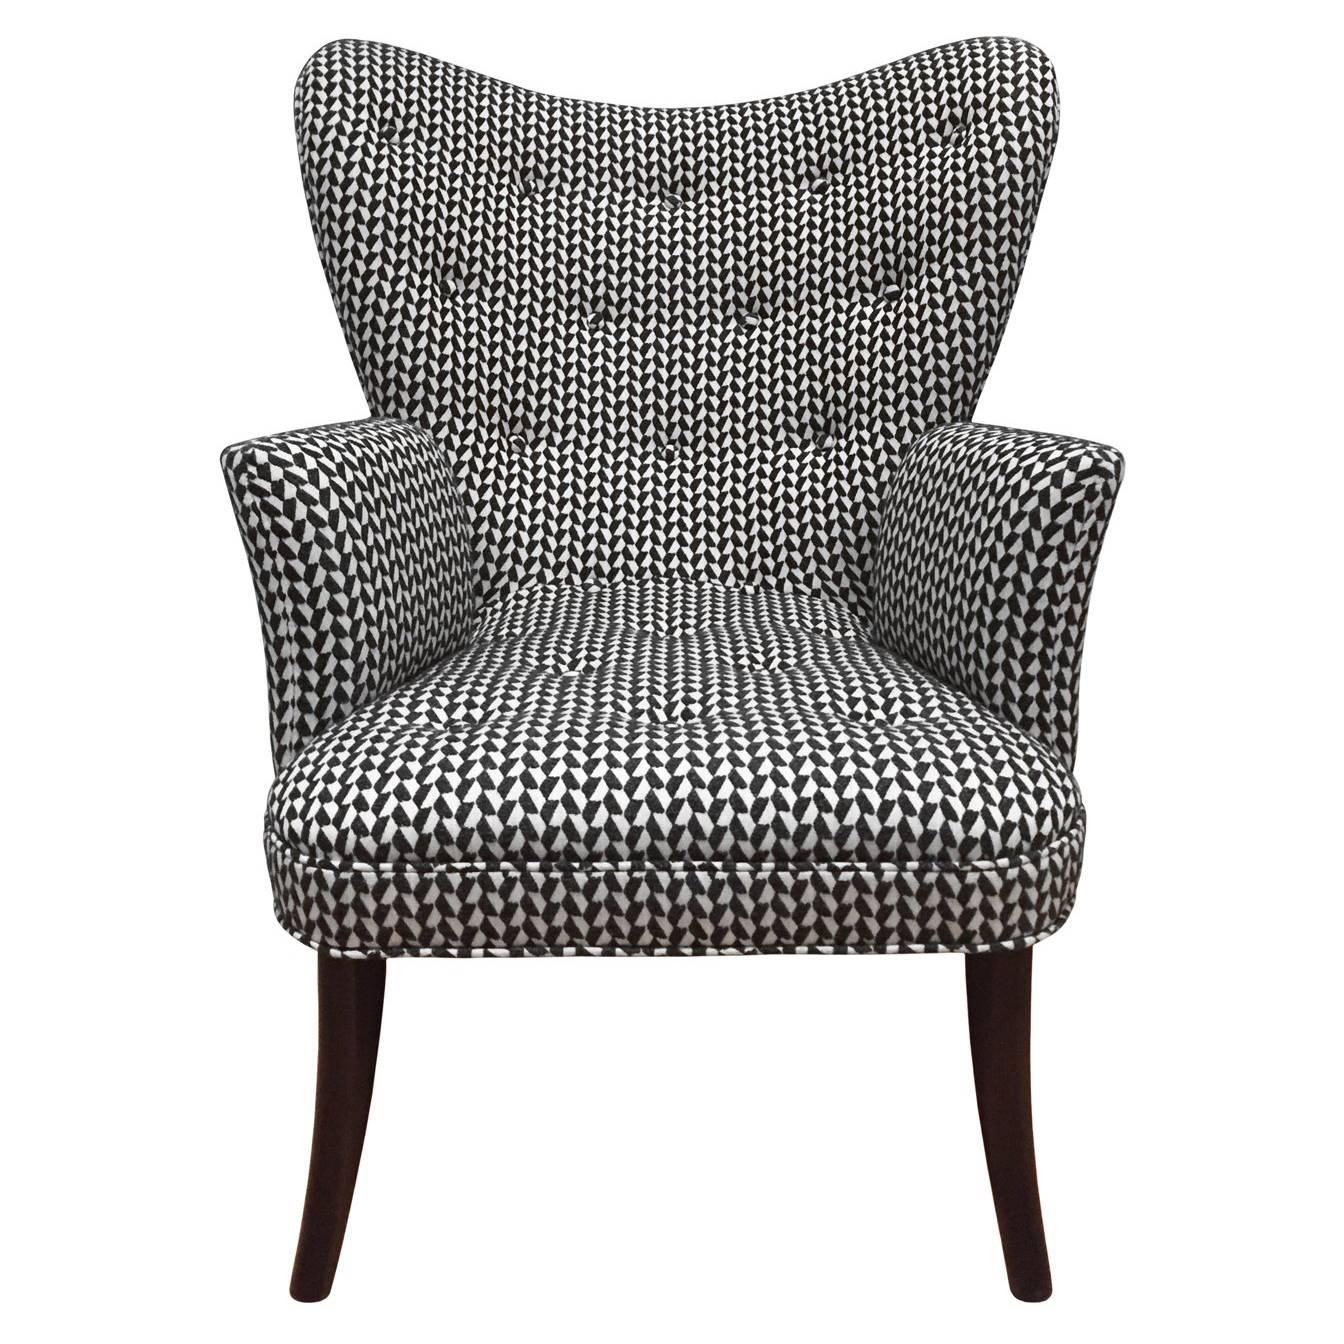 American Flair Home Collection Custom Paolo Armchair in Black and White Textured Twill